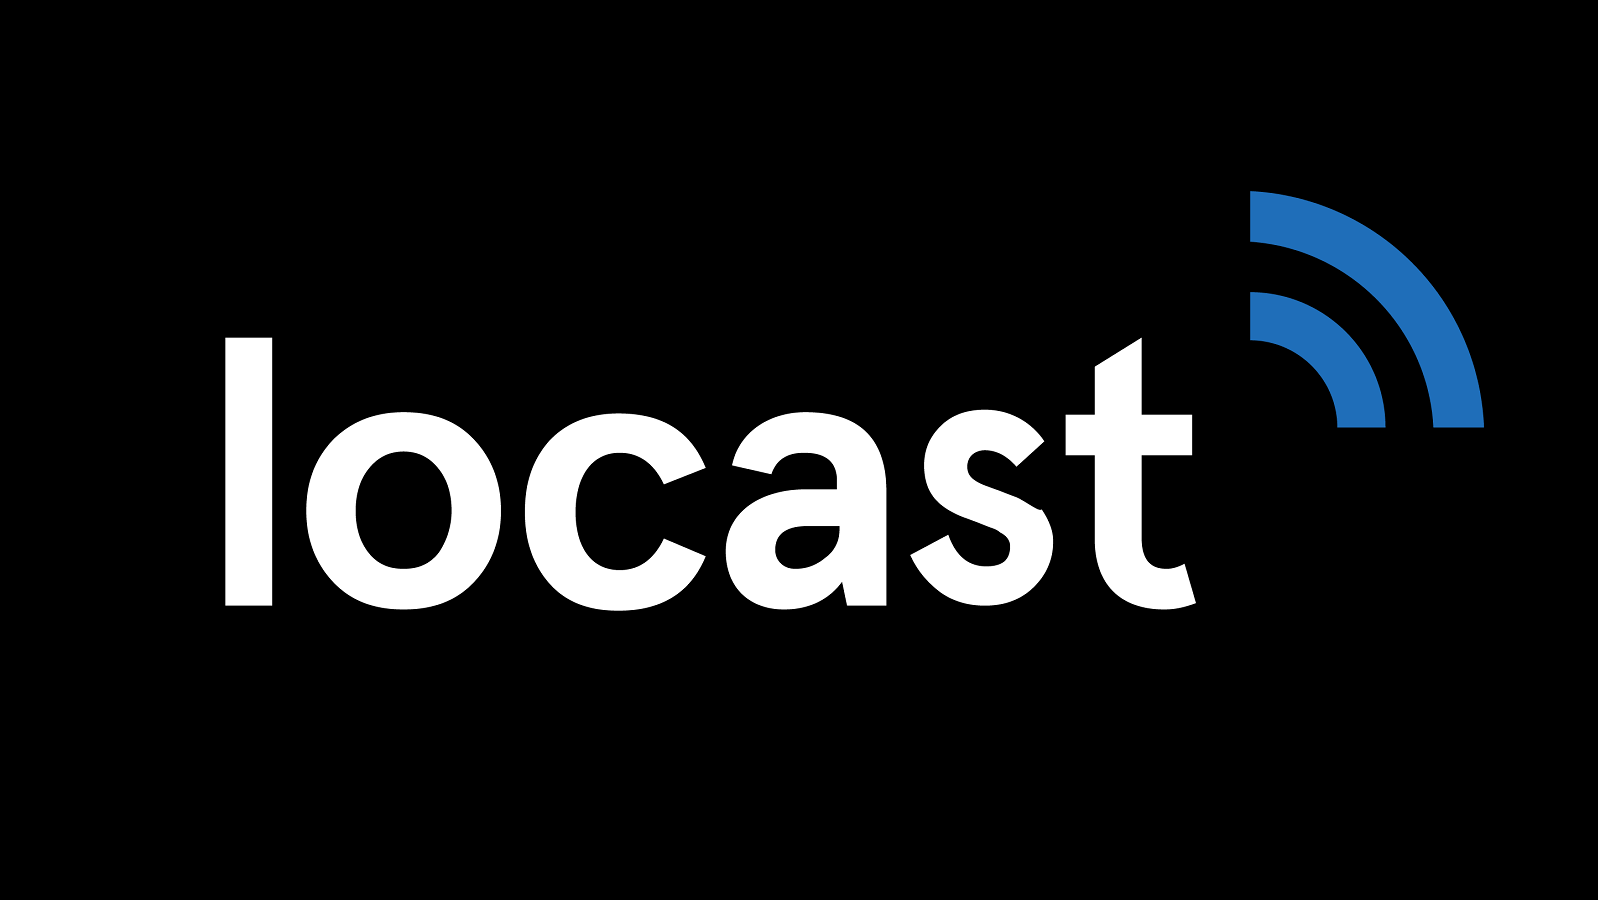 Judge Permanently Bars Locast From Continuing Its Operations